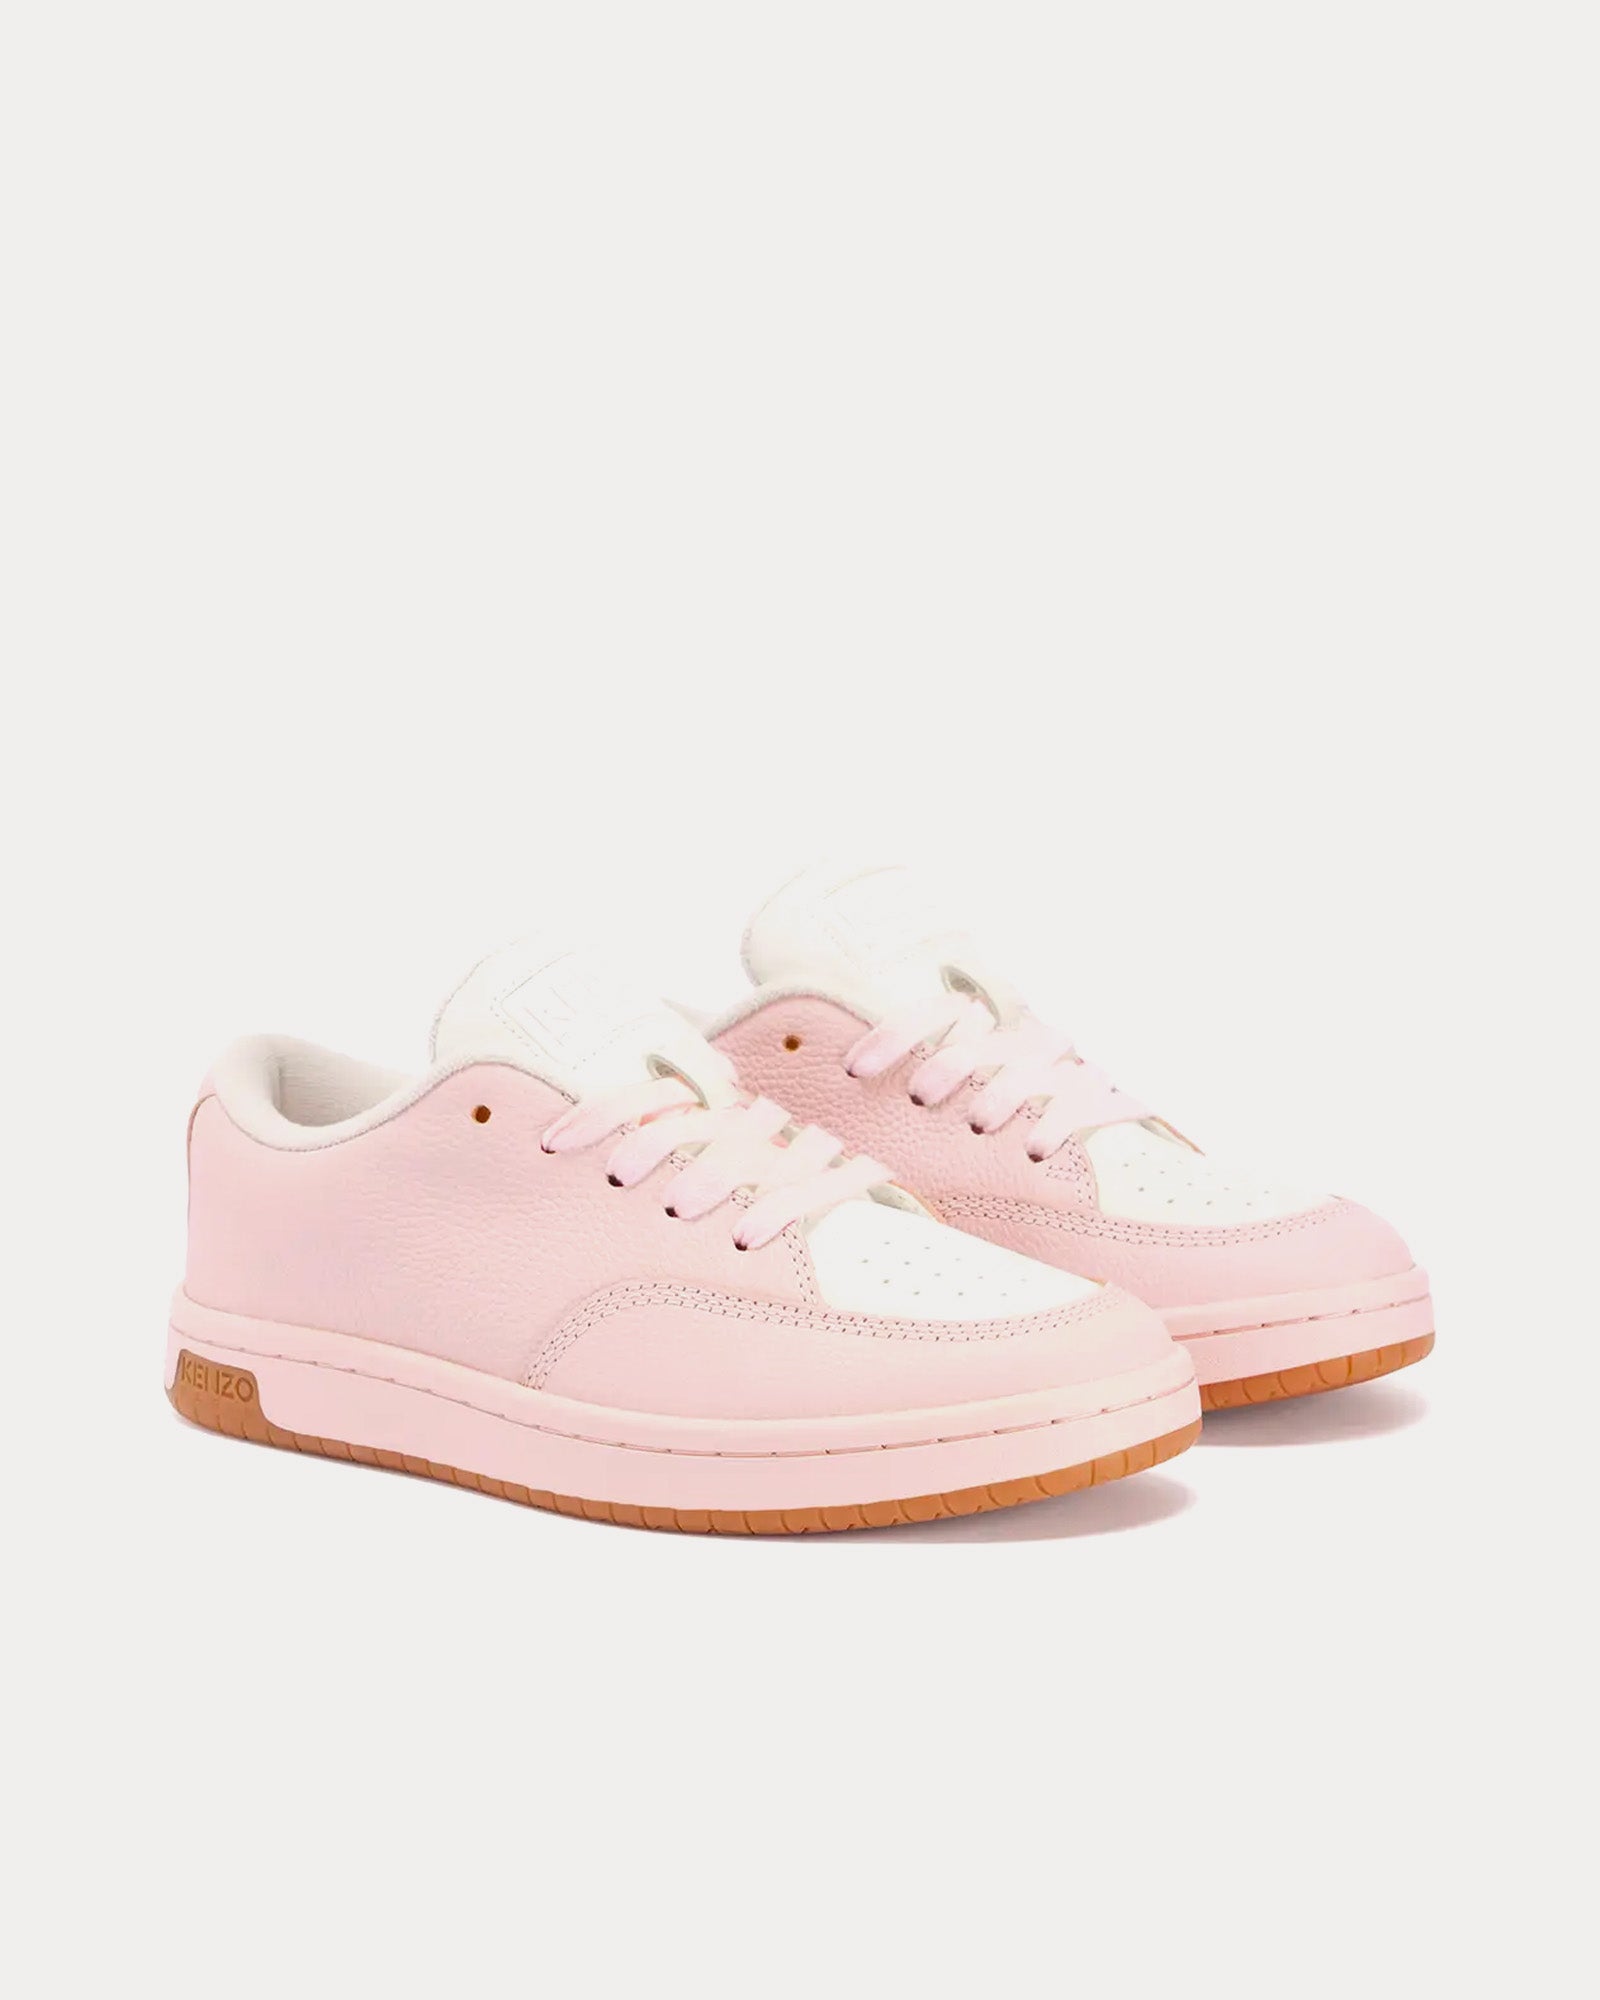 Kenzo - Kenzo-Dome Leather Faded Pink Low Top Sneakers